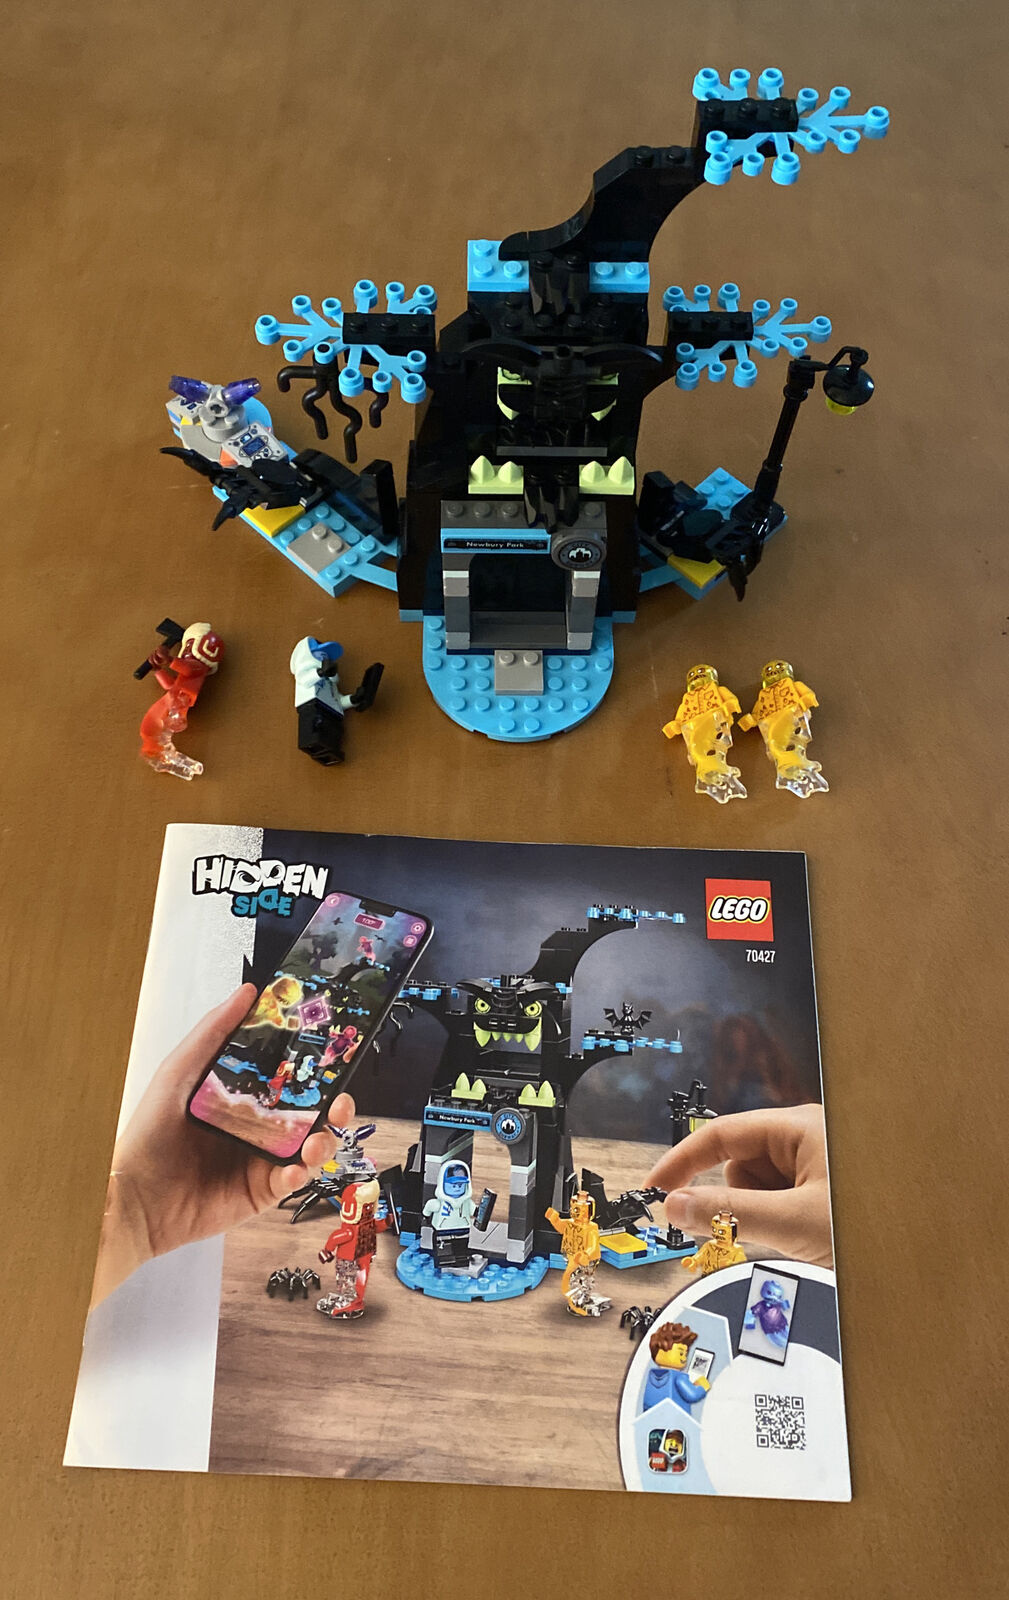 LEGO 70427 Welcome to the Hidden Side - Complete - No Box